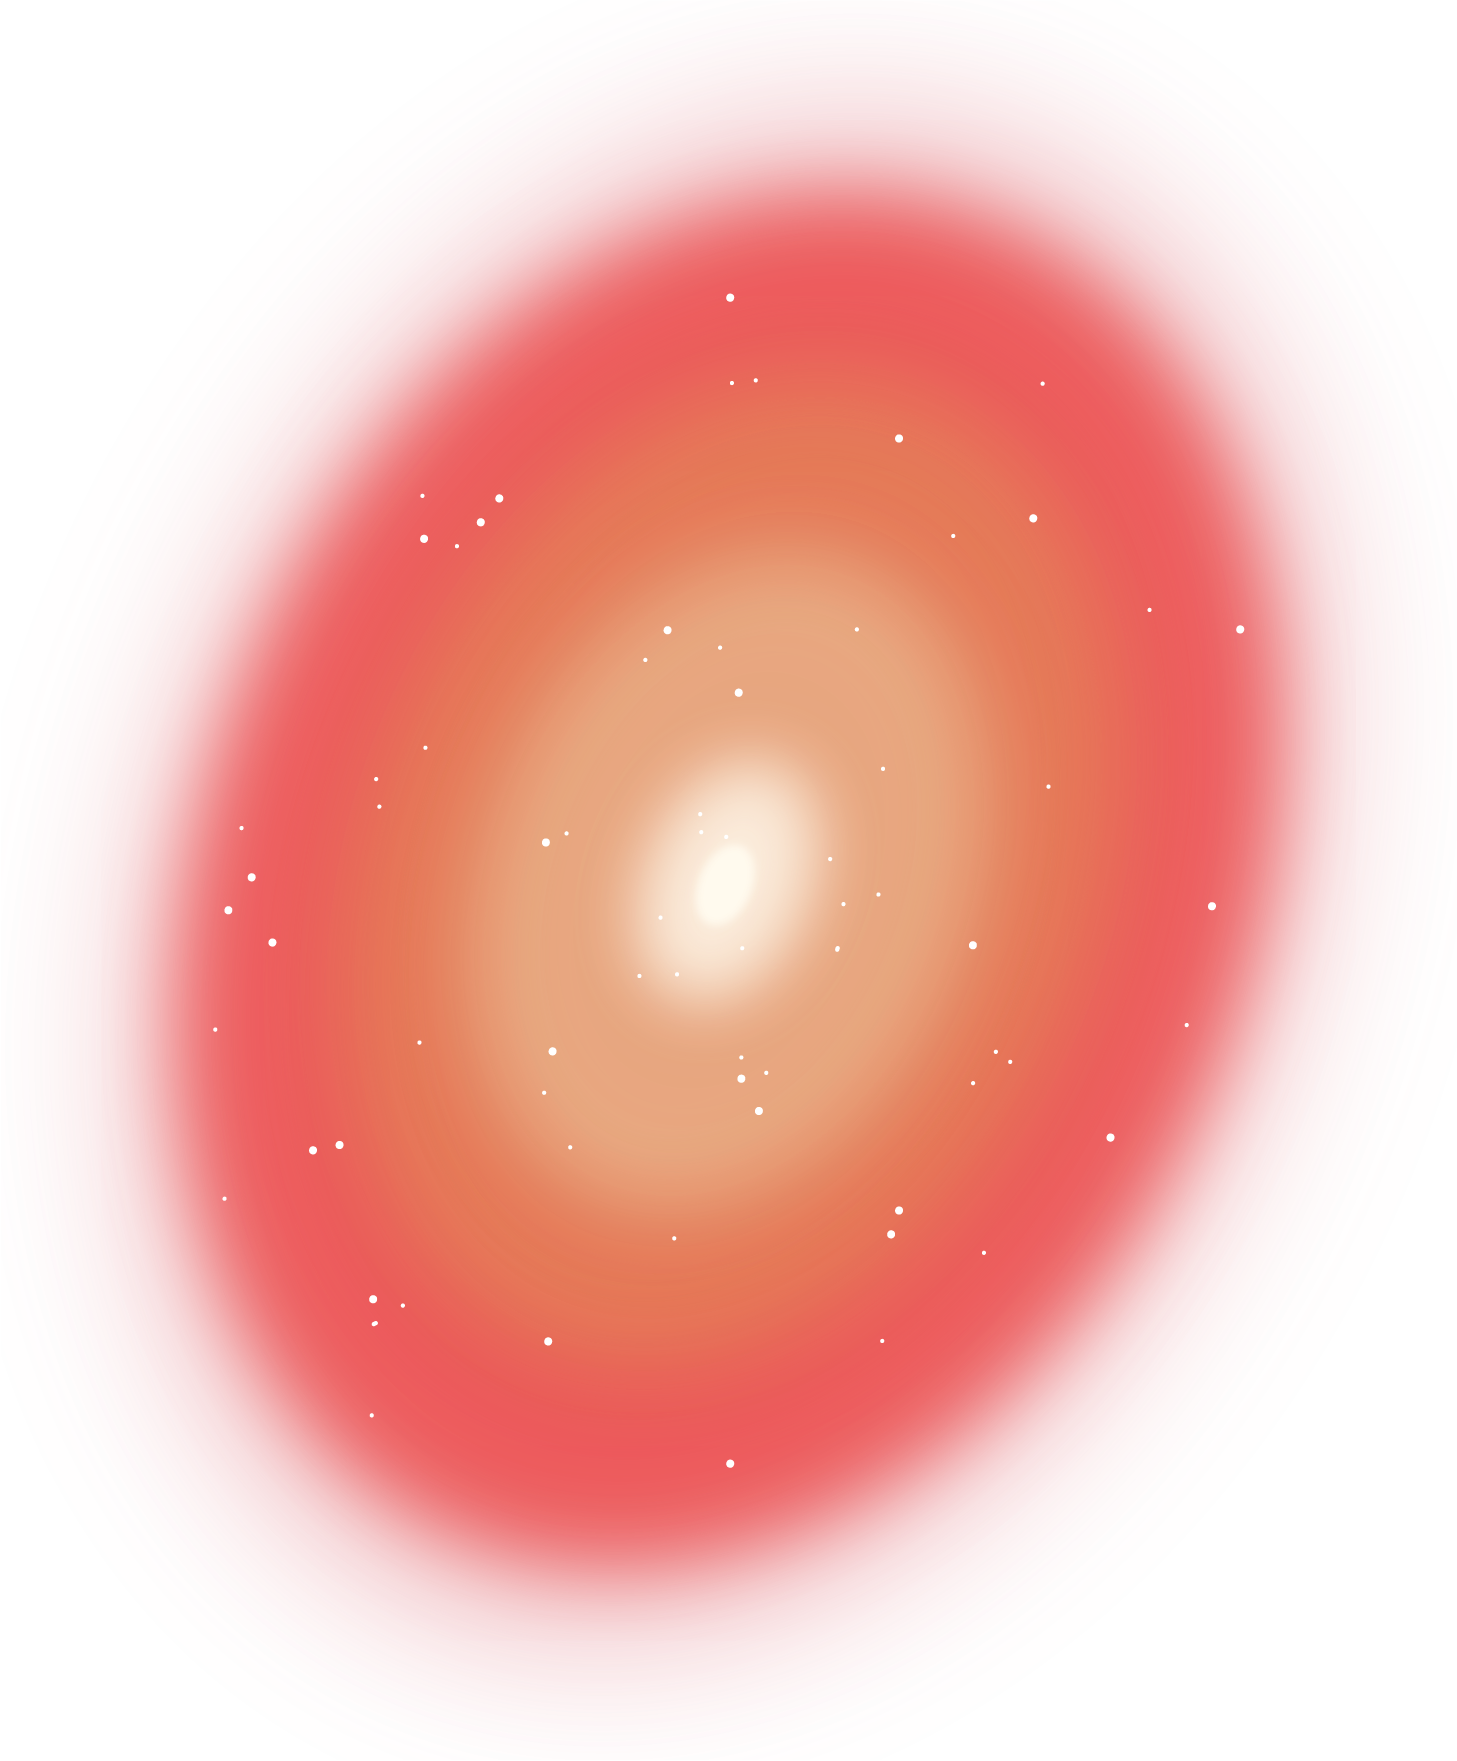 A diffuse oval is outlined by dark orange but gets progressively lighter in rings towards the center, a bright white spot surrounded by a small ring of white haze. White dots representing stars speckle the image.